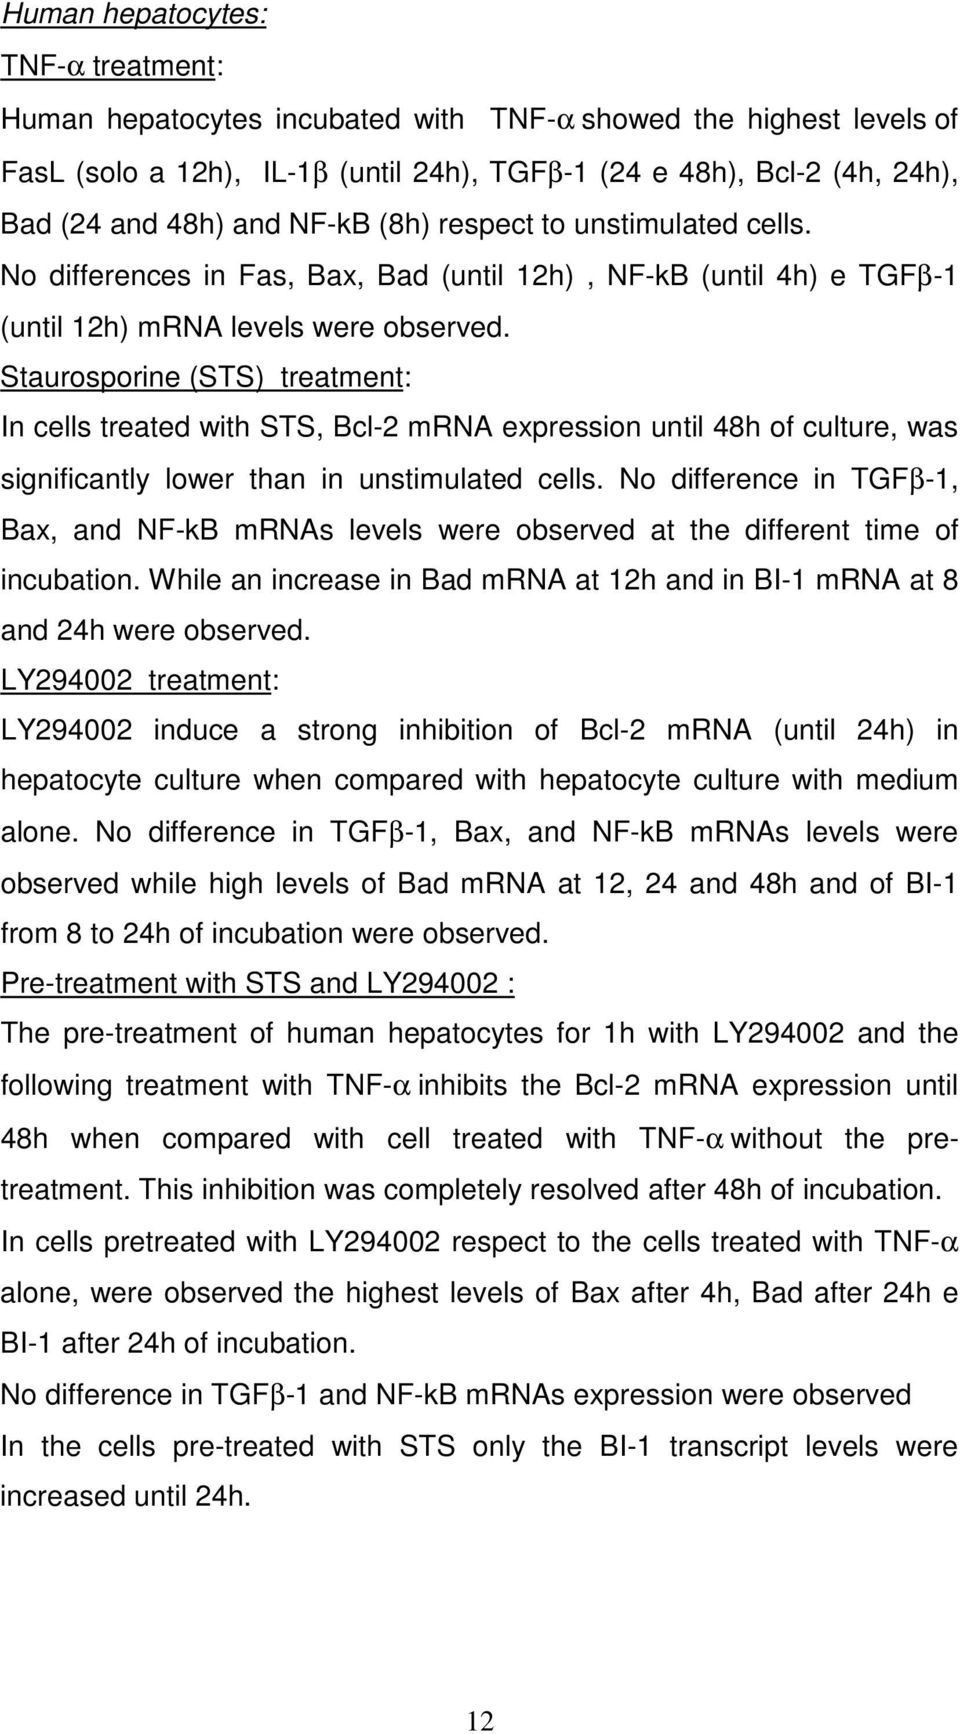 Staurosporine (STS) treatment: In cells treated with STS, Bcl-2 mrna expression until 48h of culture, was significantly lower than in unstimulated cells.